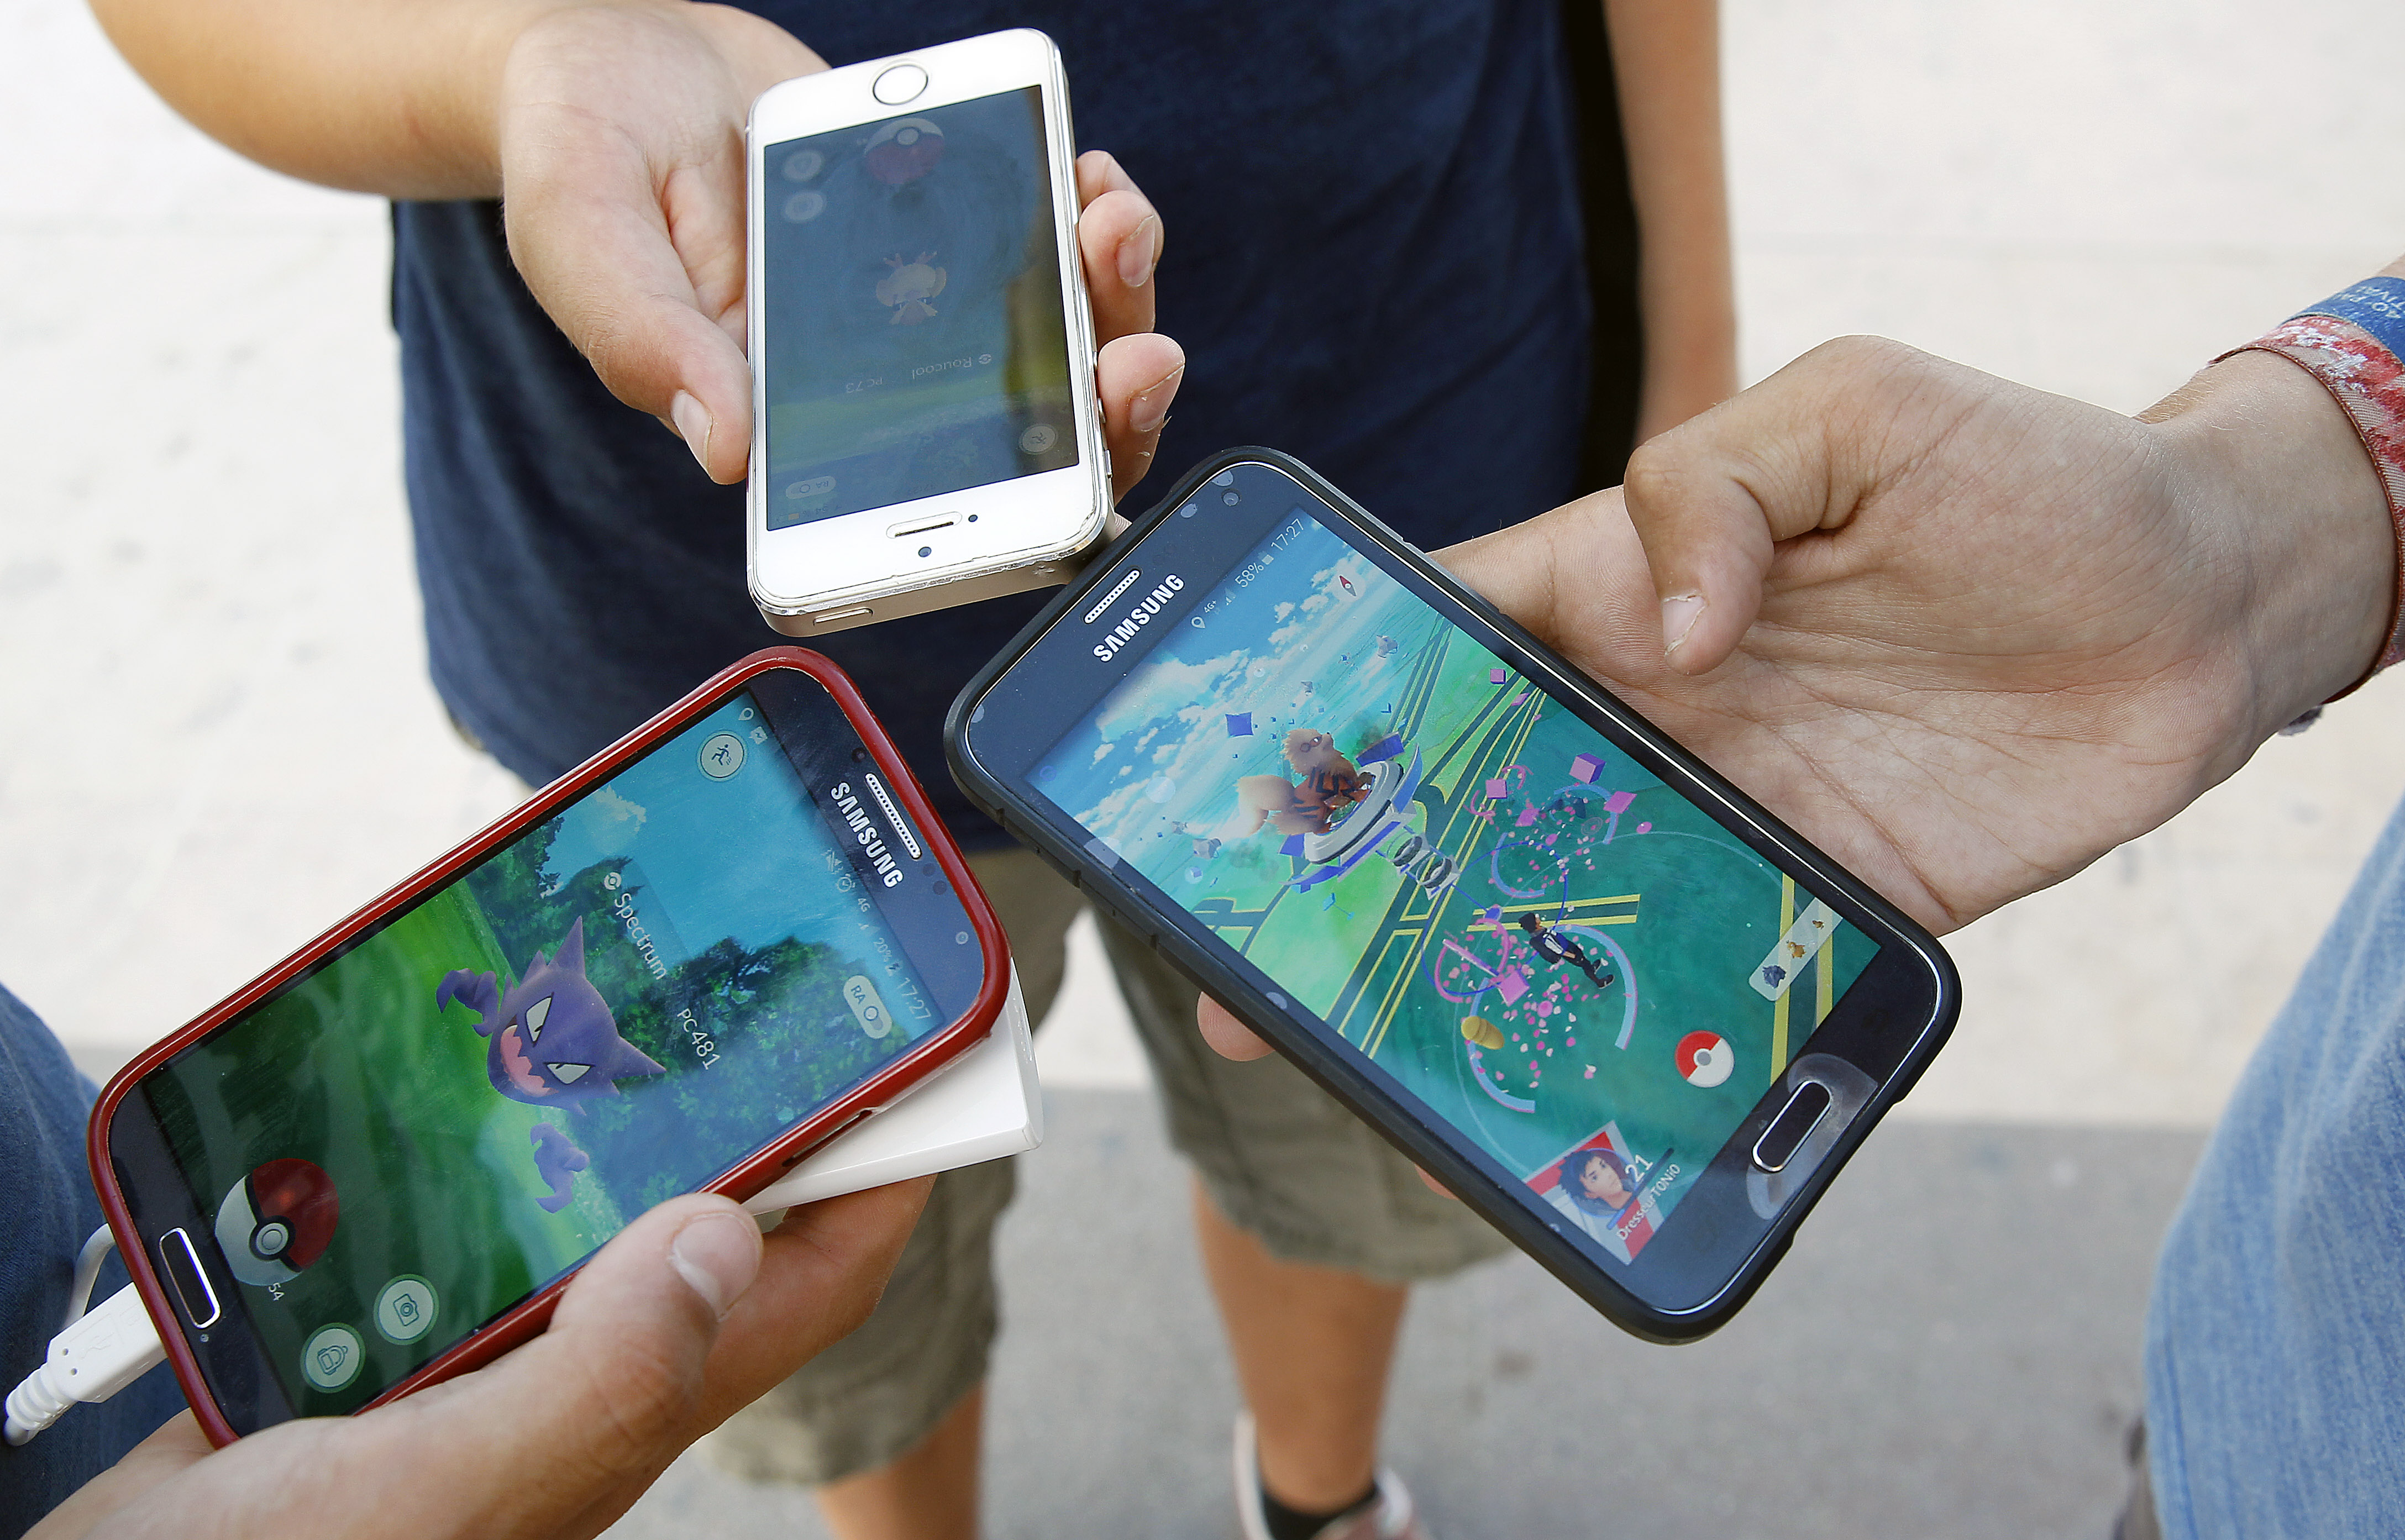 PARIS, FRANCE - SEPTEMBER 08:  Kids show the screen of their smartphone with Nintendo Co.'s Pokemon Go augmented-reality game at the Trocadero in front of the Eiffel tower on September 8, 2016 in Paris, France. (Chesnot&mdash;Getty Images)